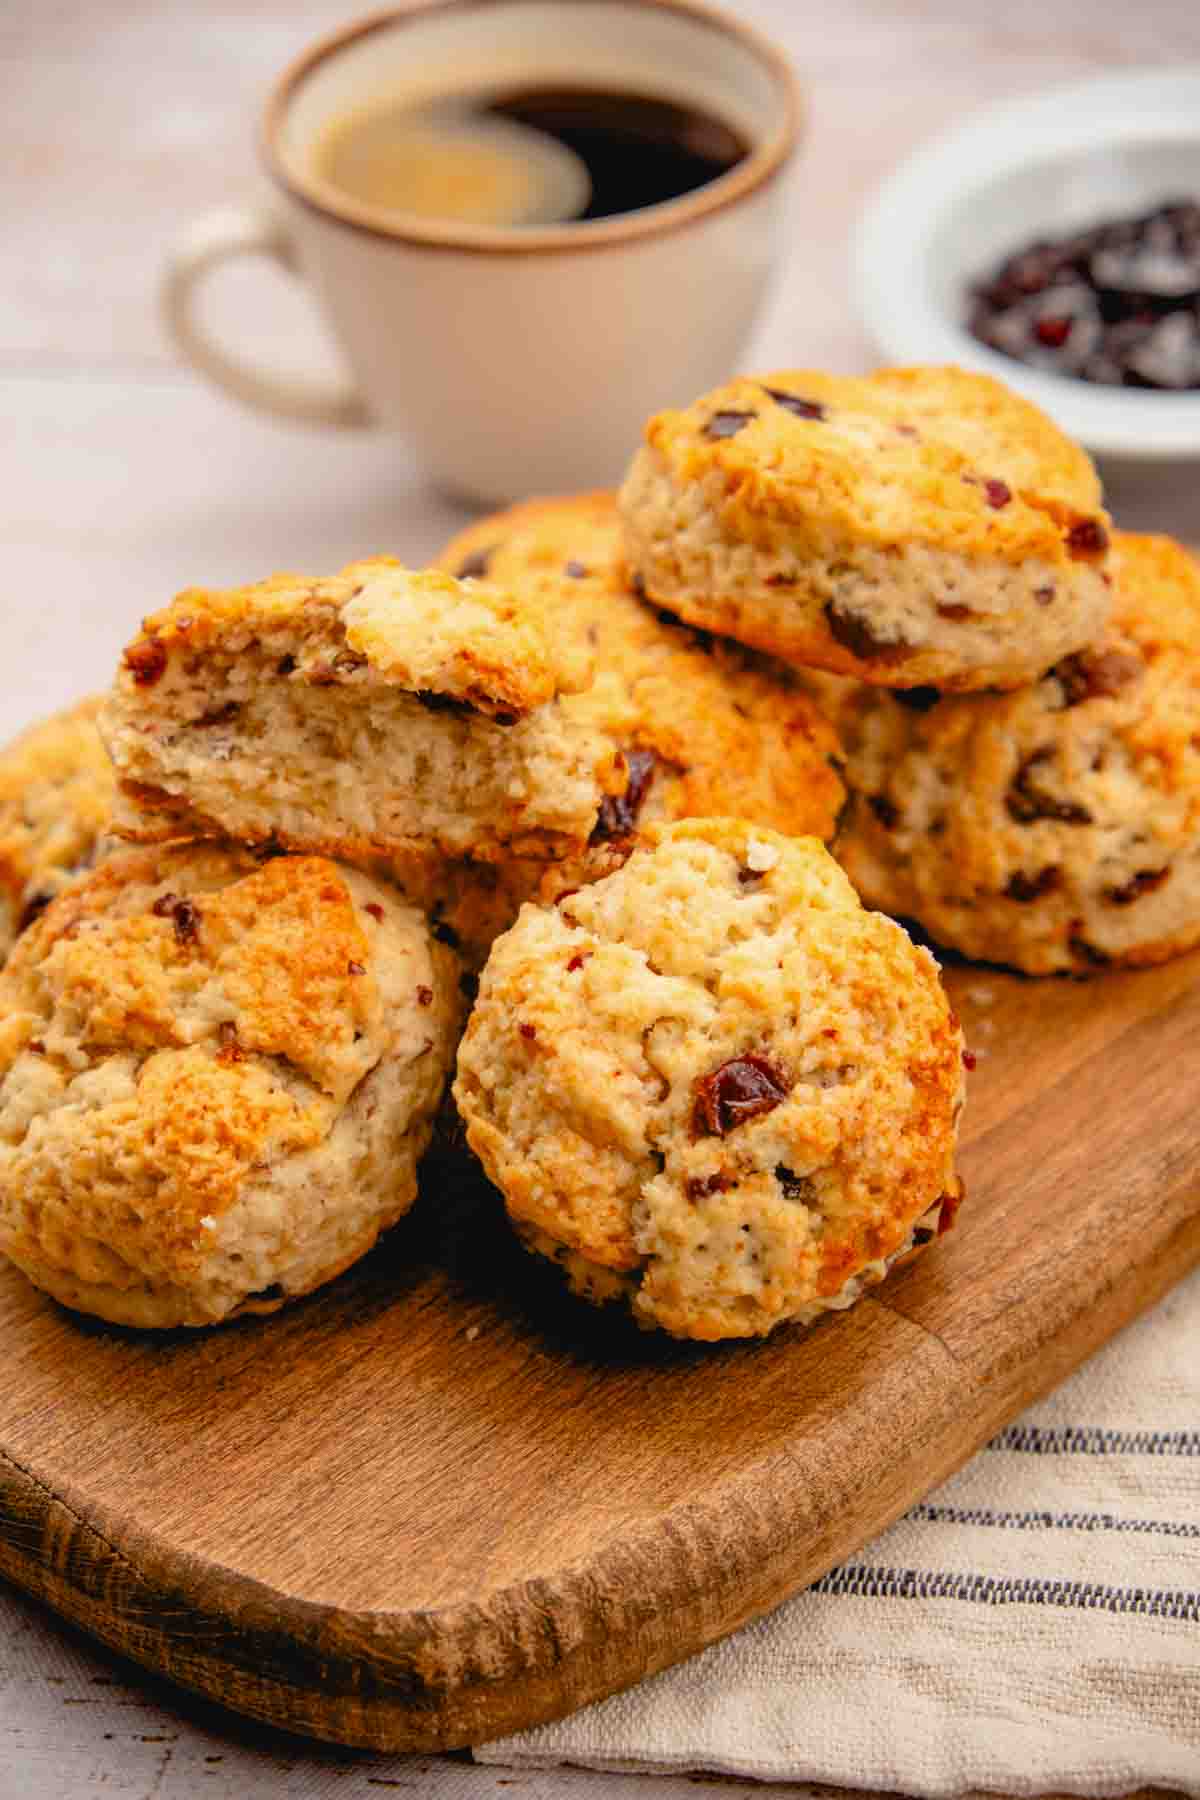 Scones made with chopped and pitted dates served on a wooden platter. A cup of coffee and a bowl of dates are visible in the background.